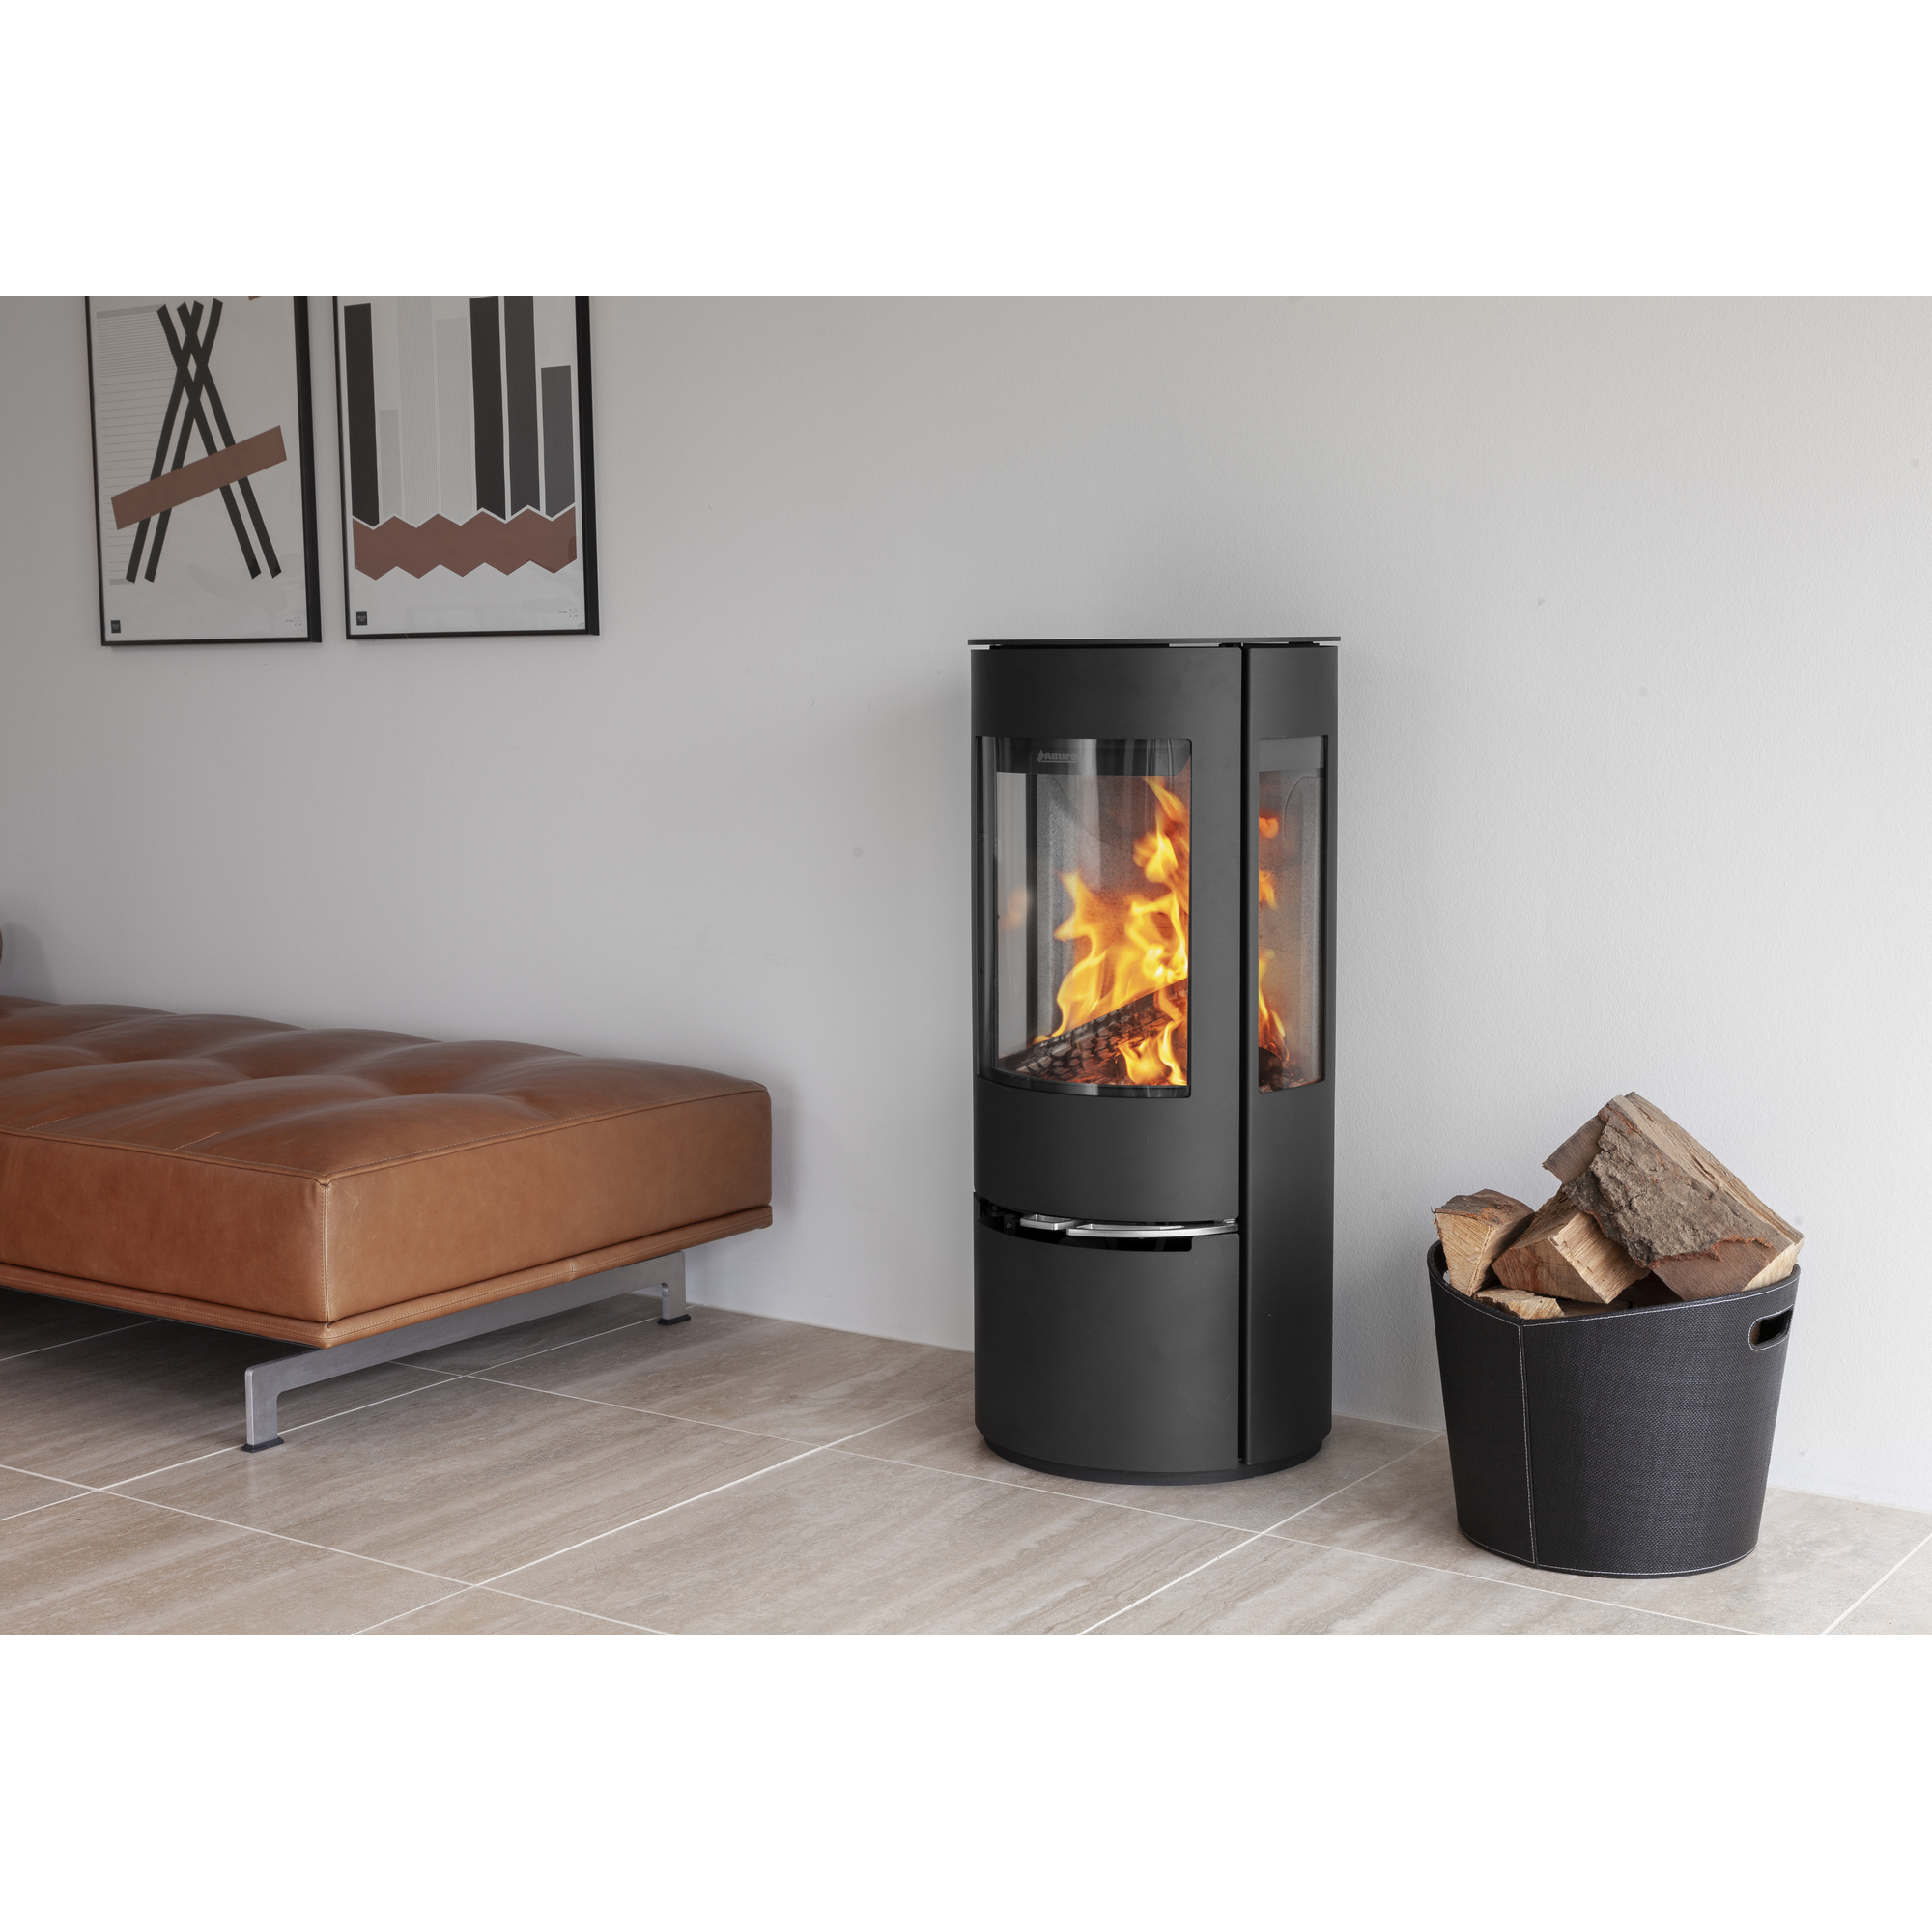 Kaminofen '22' Stahl 5,5 kW + product picture